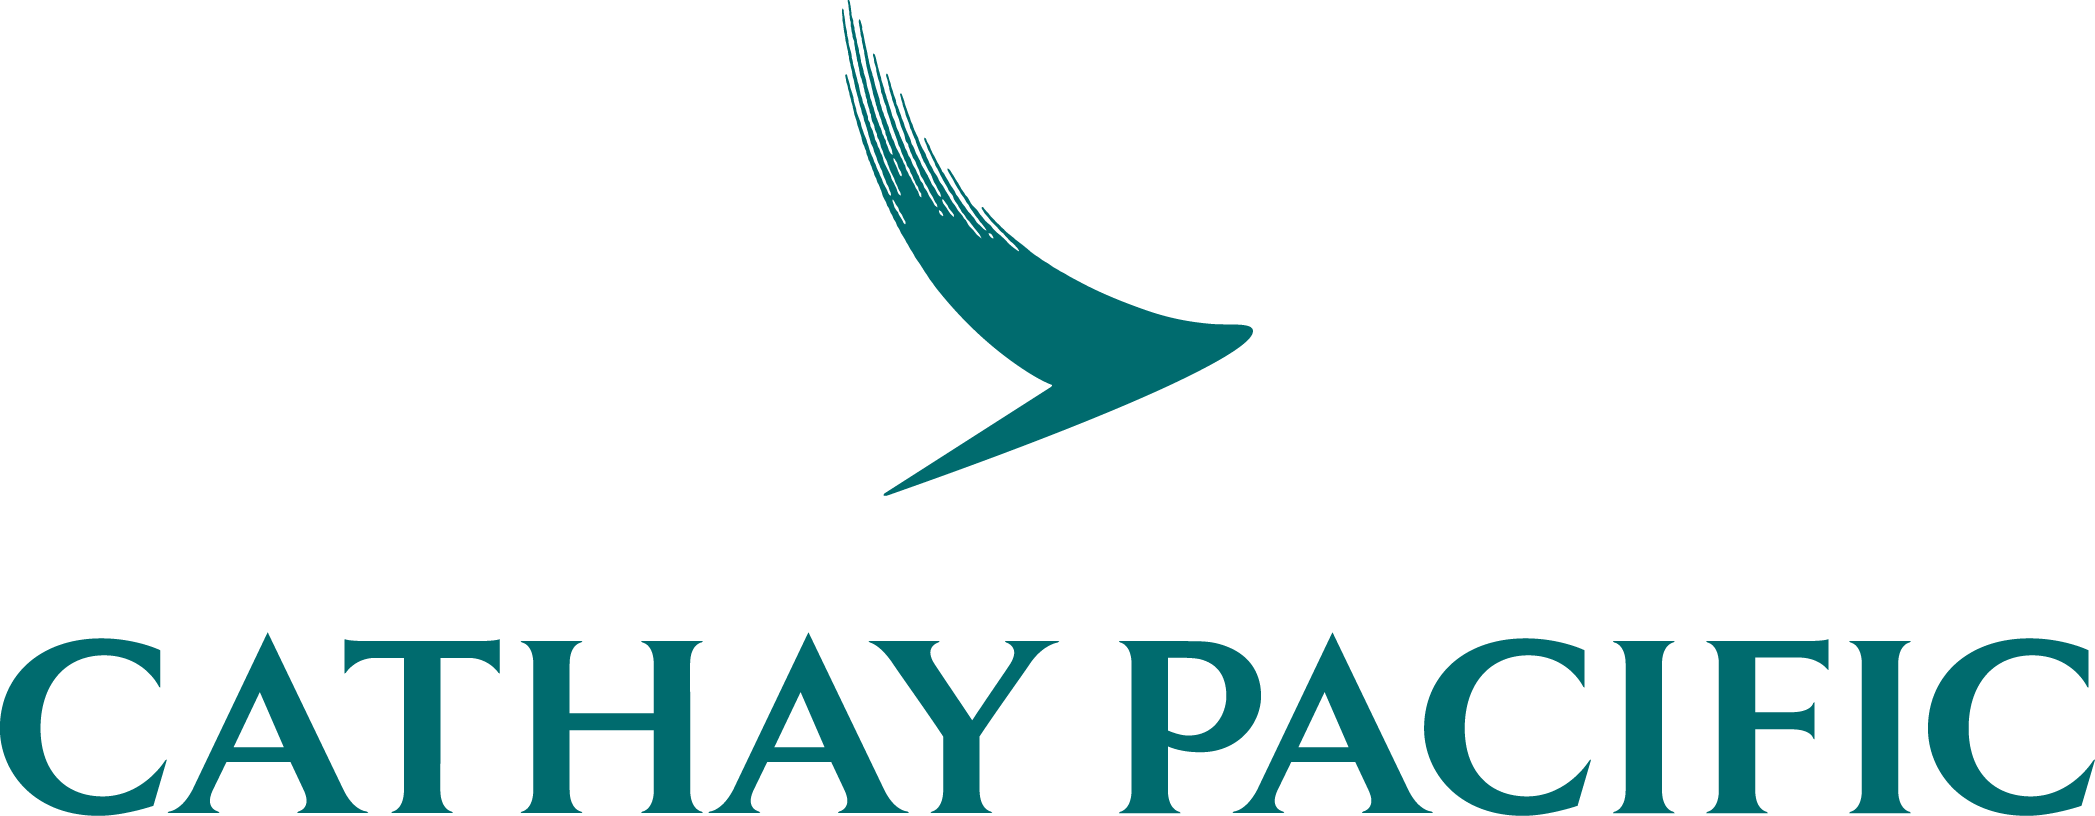 Cathay-Pacfic-logo.png